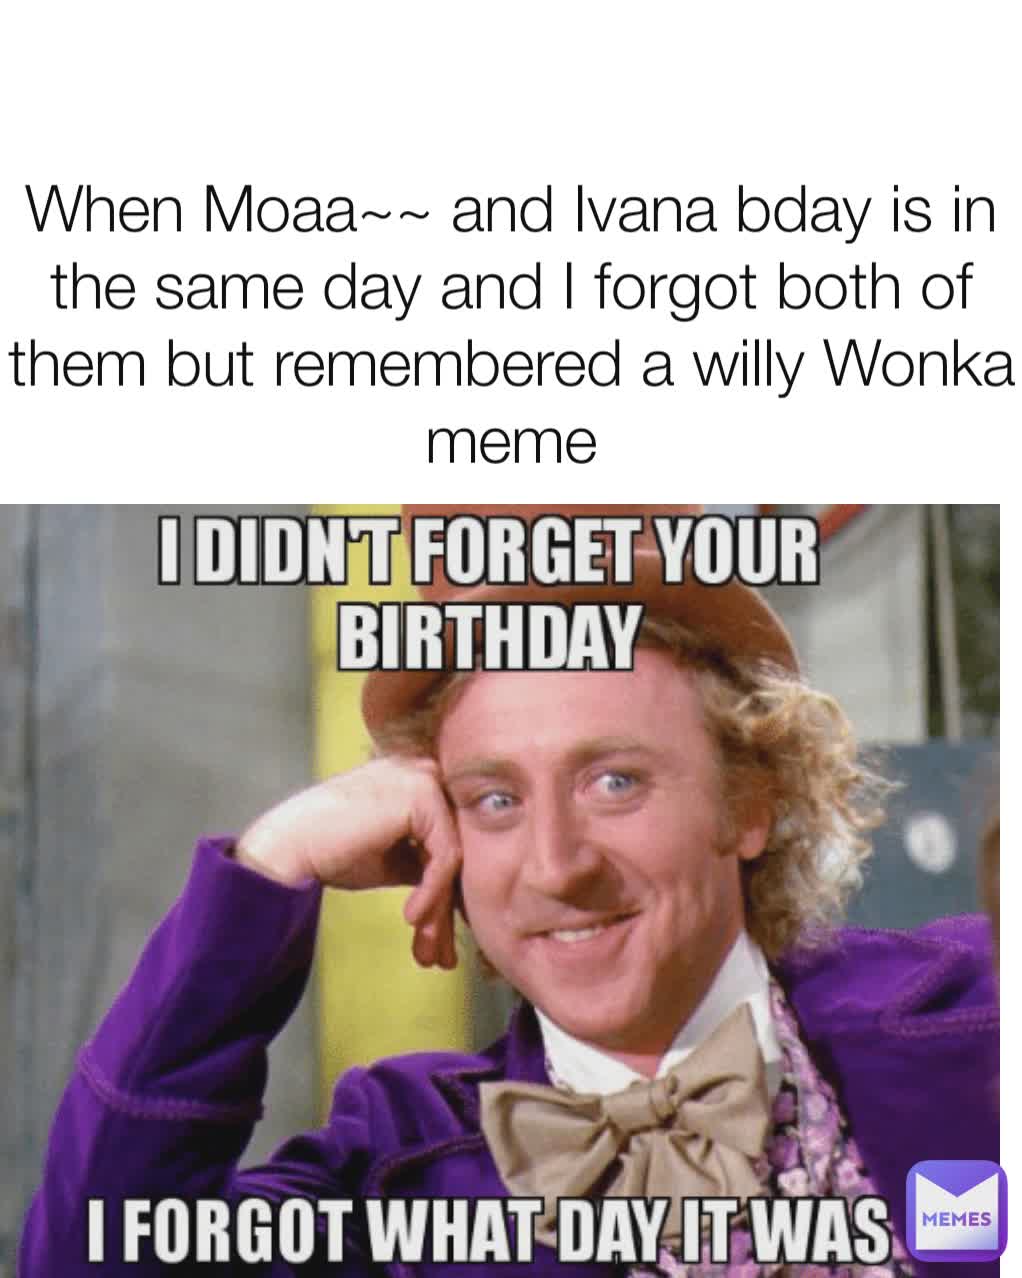 When Moaa~~ and Ivana bday is in the same day and I forgot both of them but remembered a willy Wonka meme